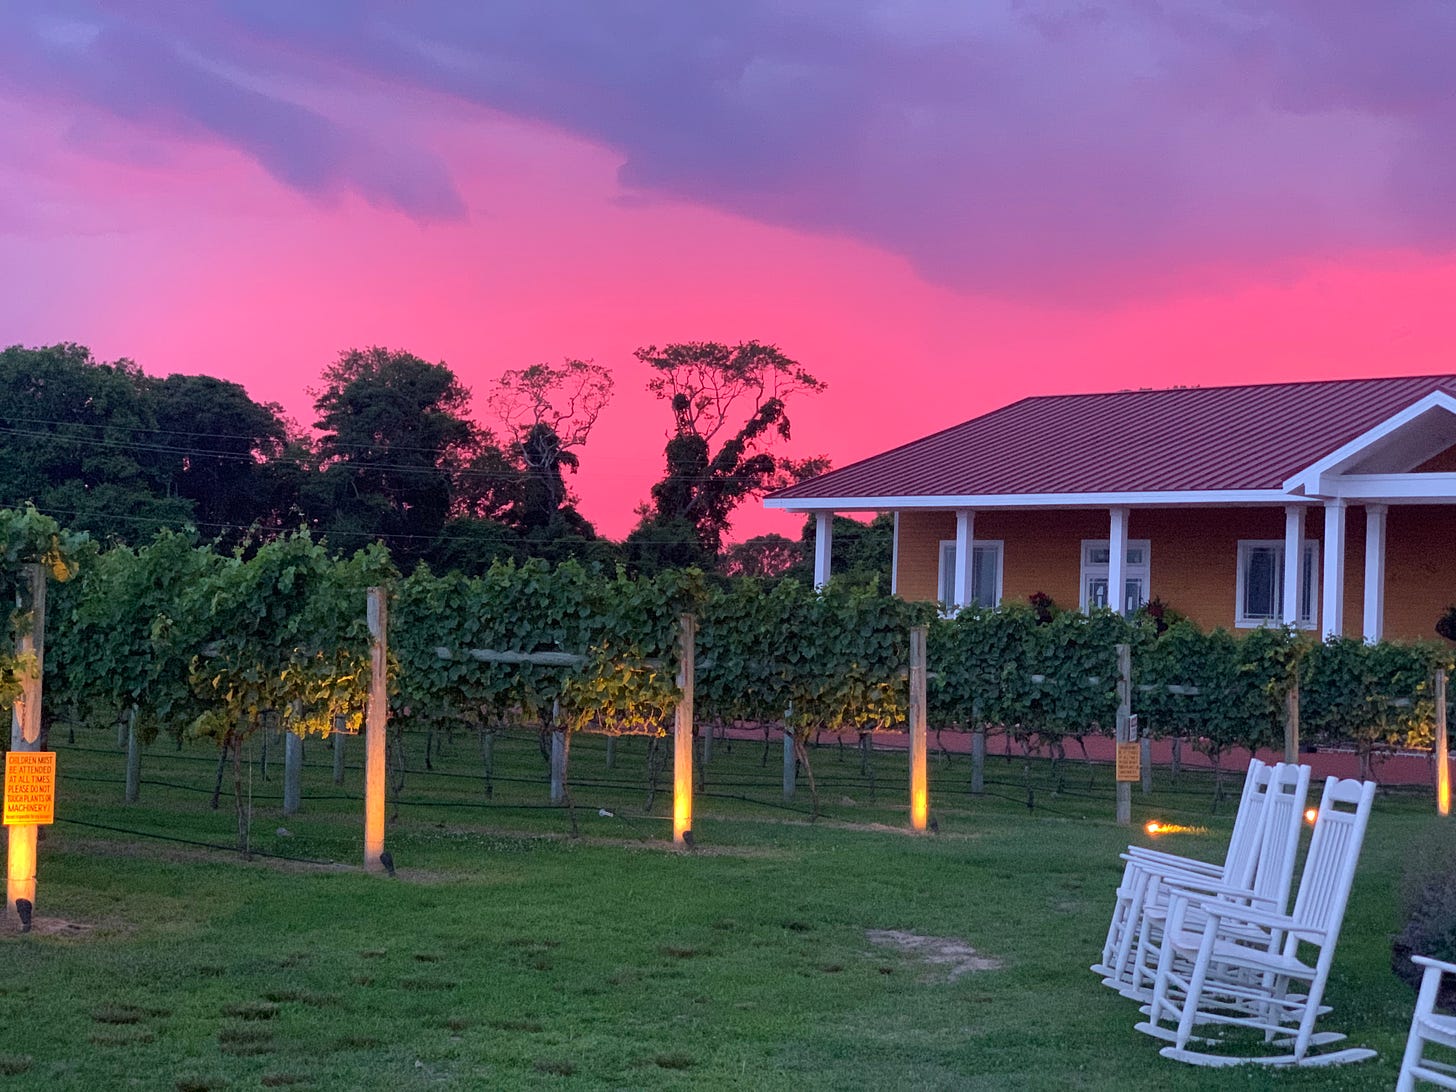 Grape vines with a bright pink and purple sunset